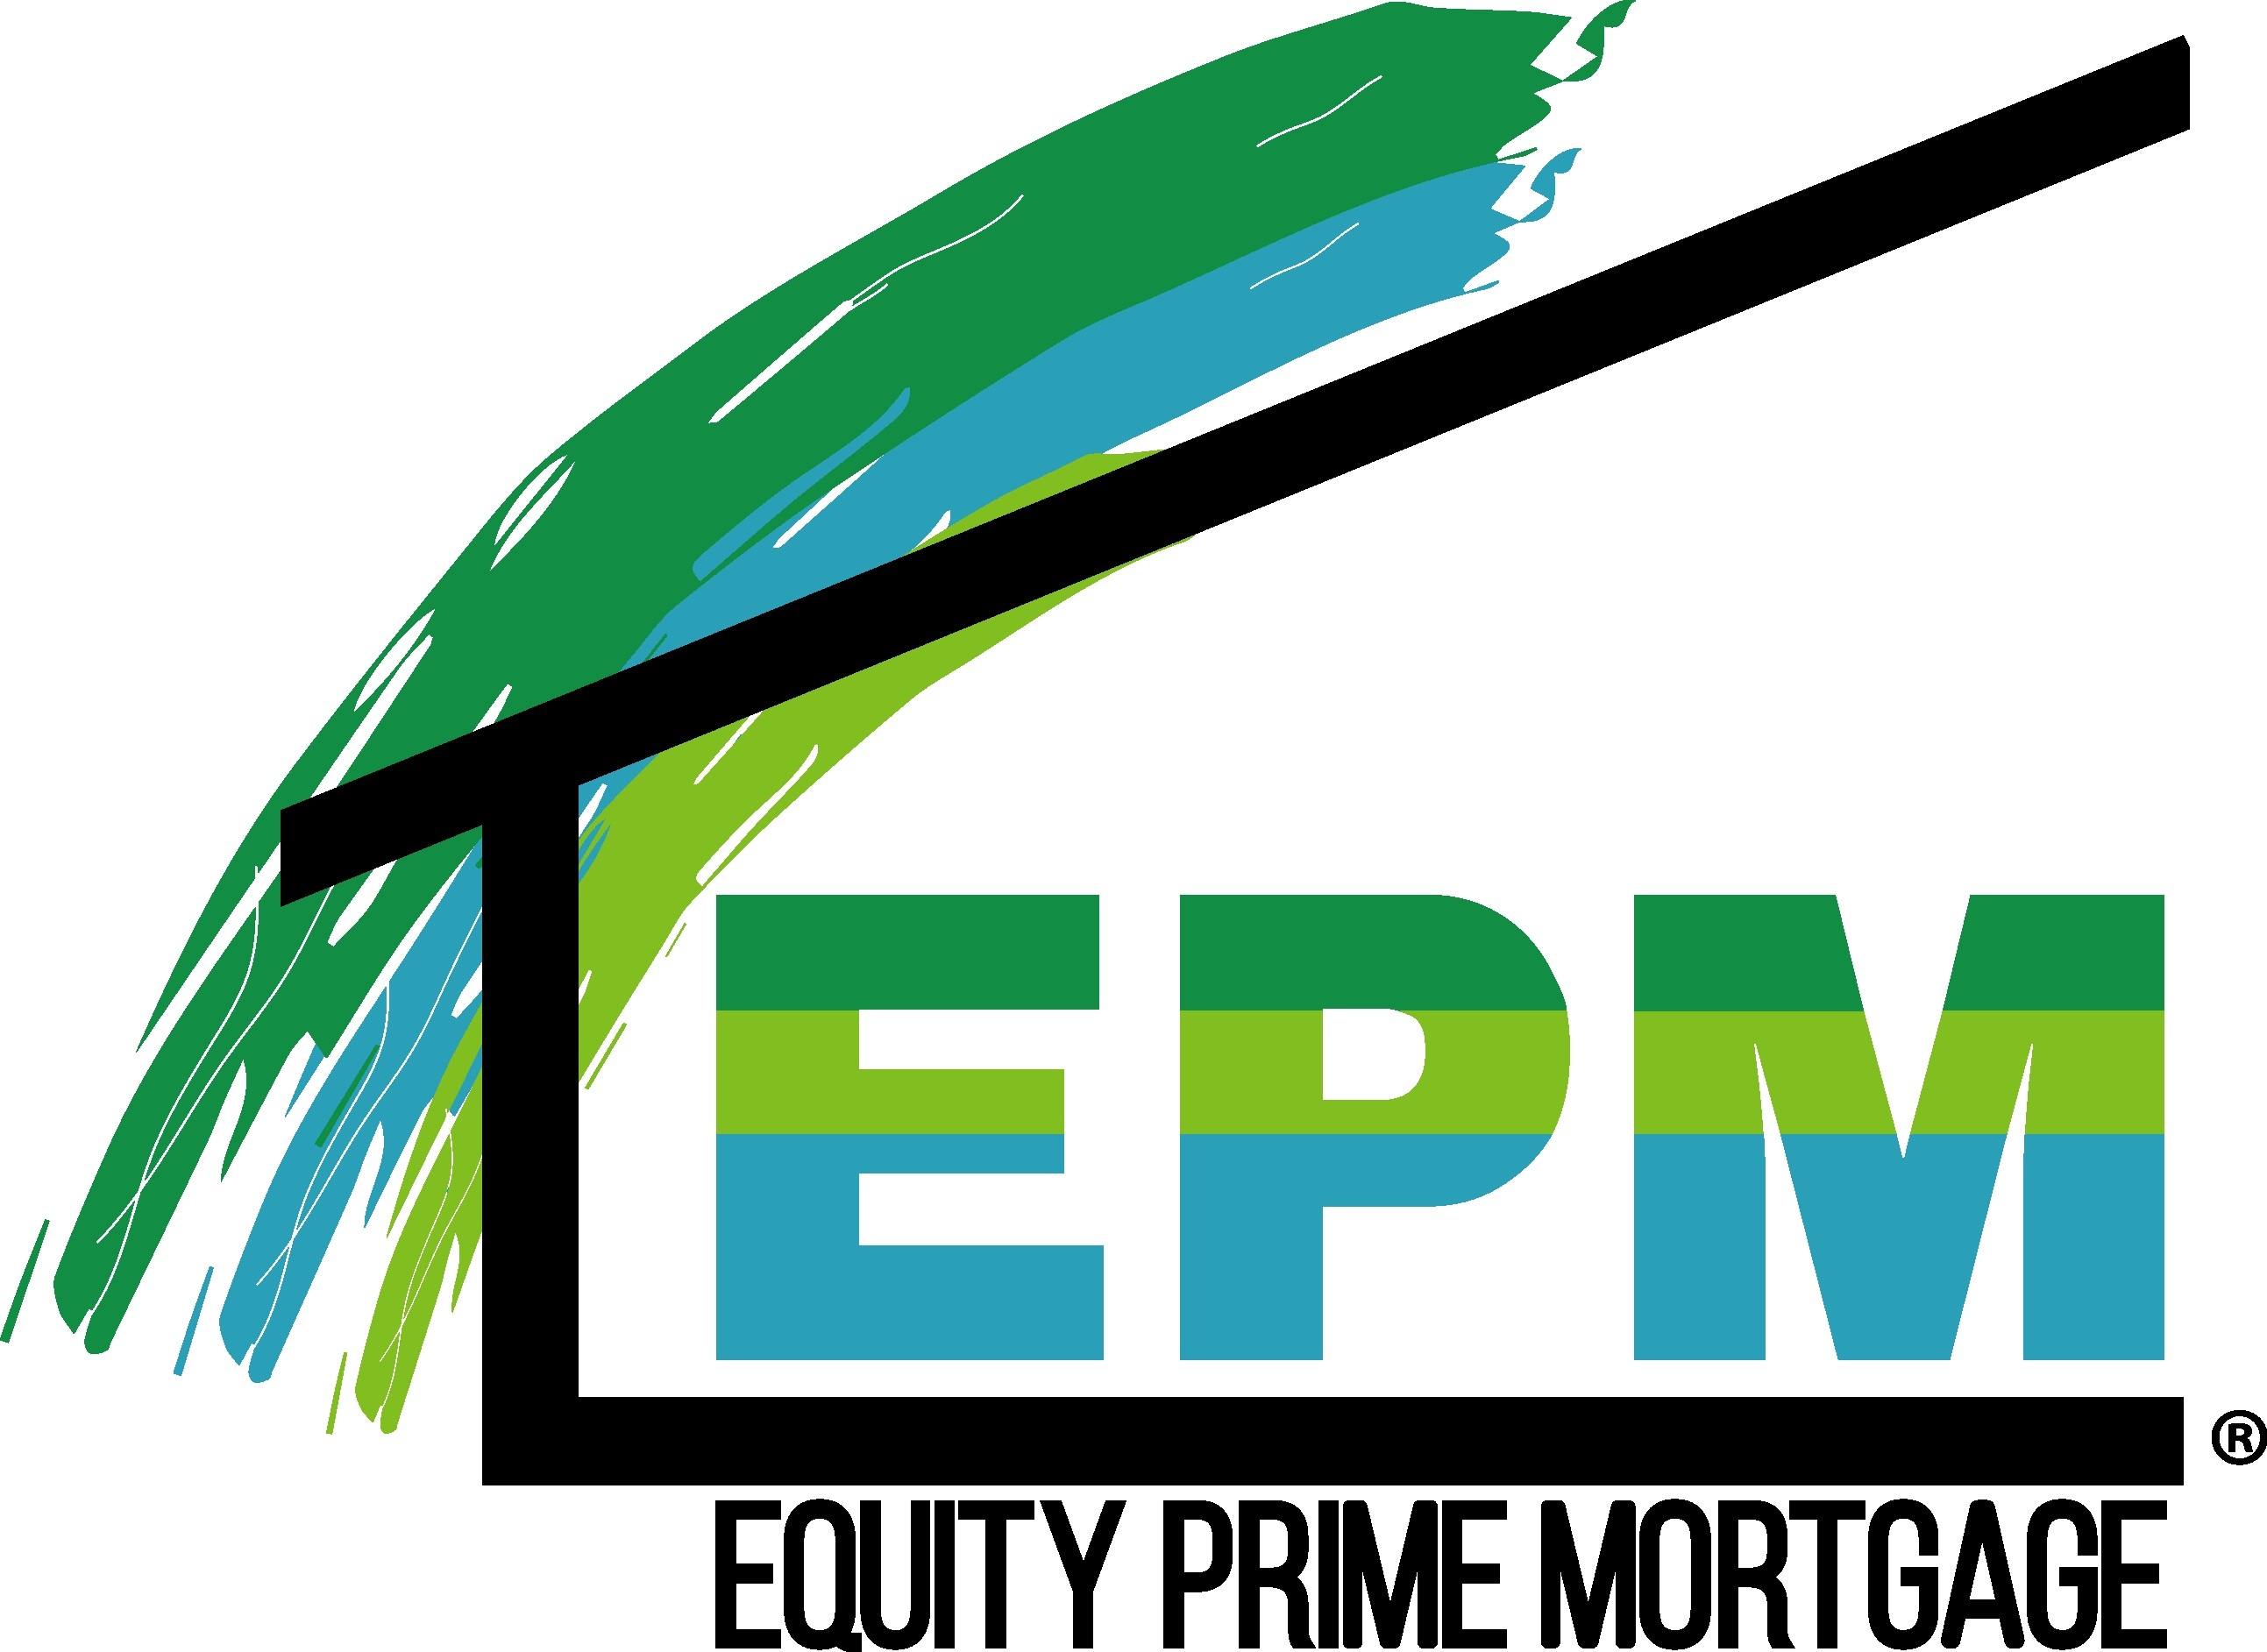 Equity Prime Mortgage (EPM) has been named Official Housing Sponsor for the Sanguine professional SMITE eSports team